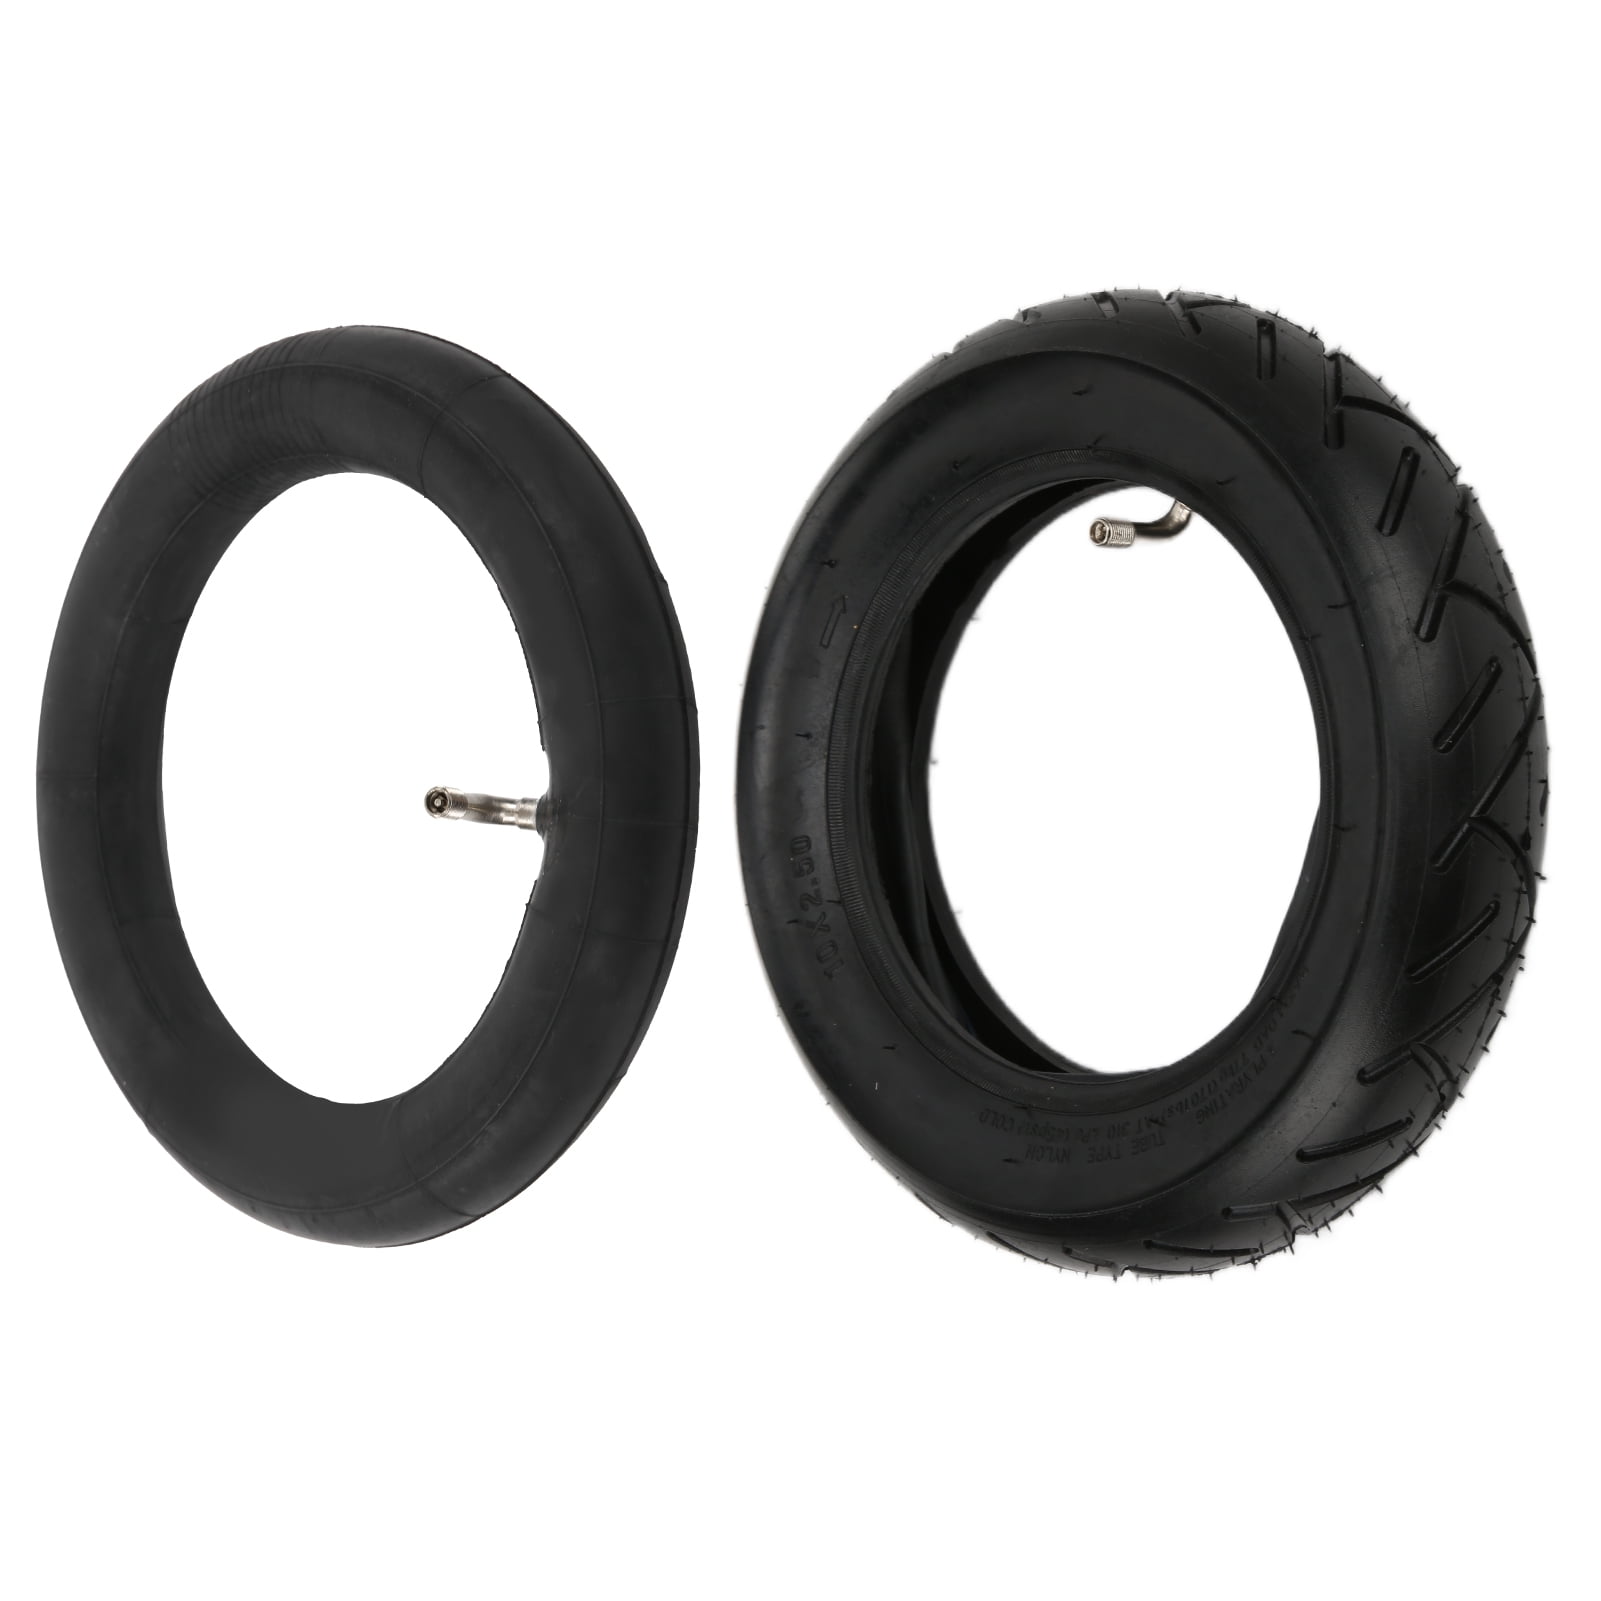 Wingsmoto 10x2.50 10 Tire Tube for 10 Inch Smart Self Balancing Electric Scooter fit 36v 48v 400w 500w 800w Hub Motor Pack of 2 Sets 